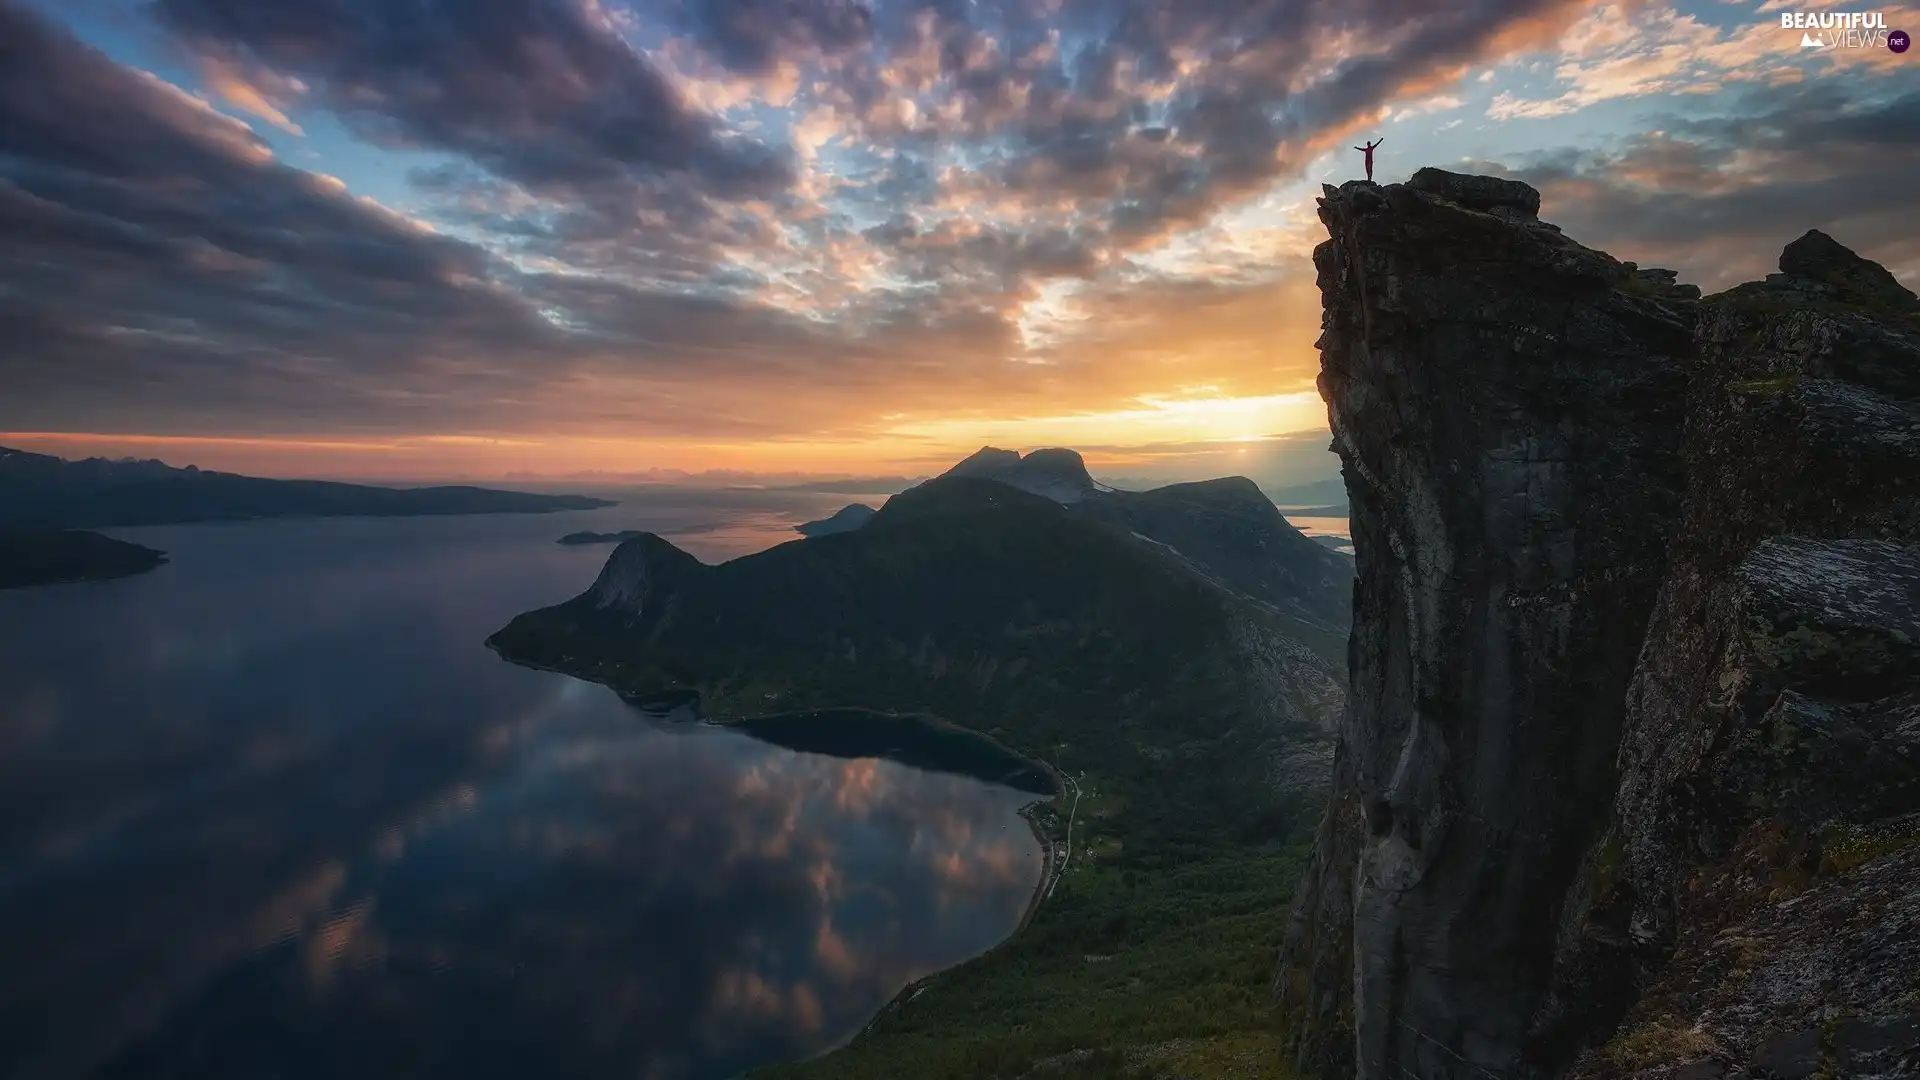 Mountains, Lofoten, Great Sunsets, North Sea, Norway, Human, clouds